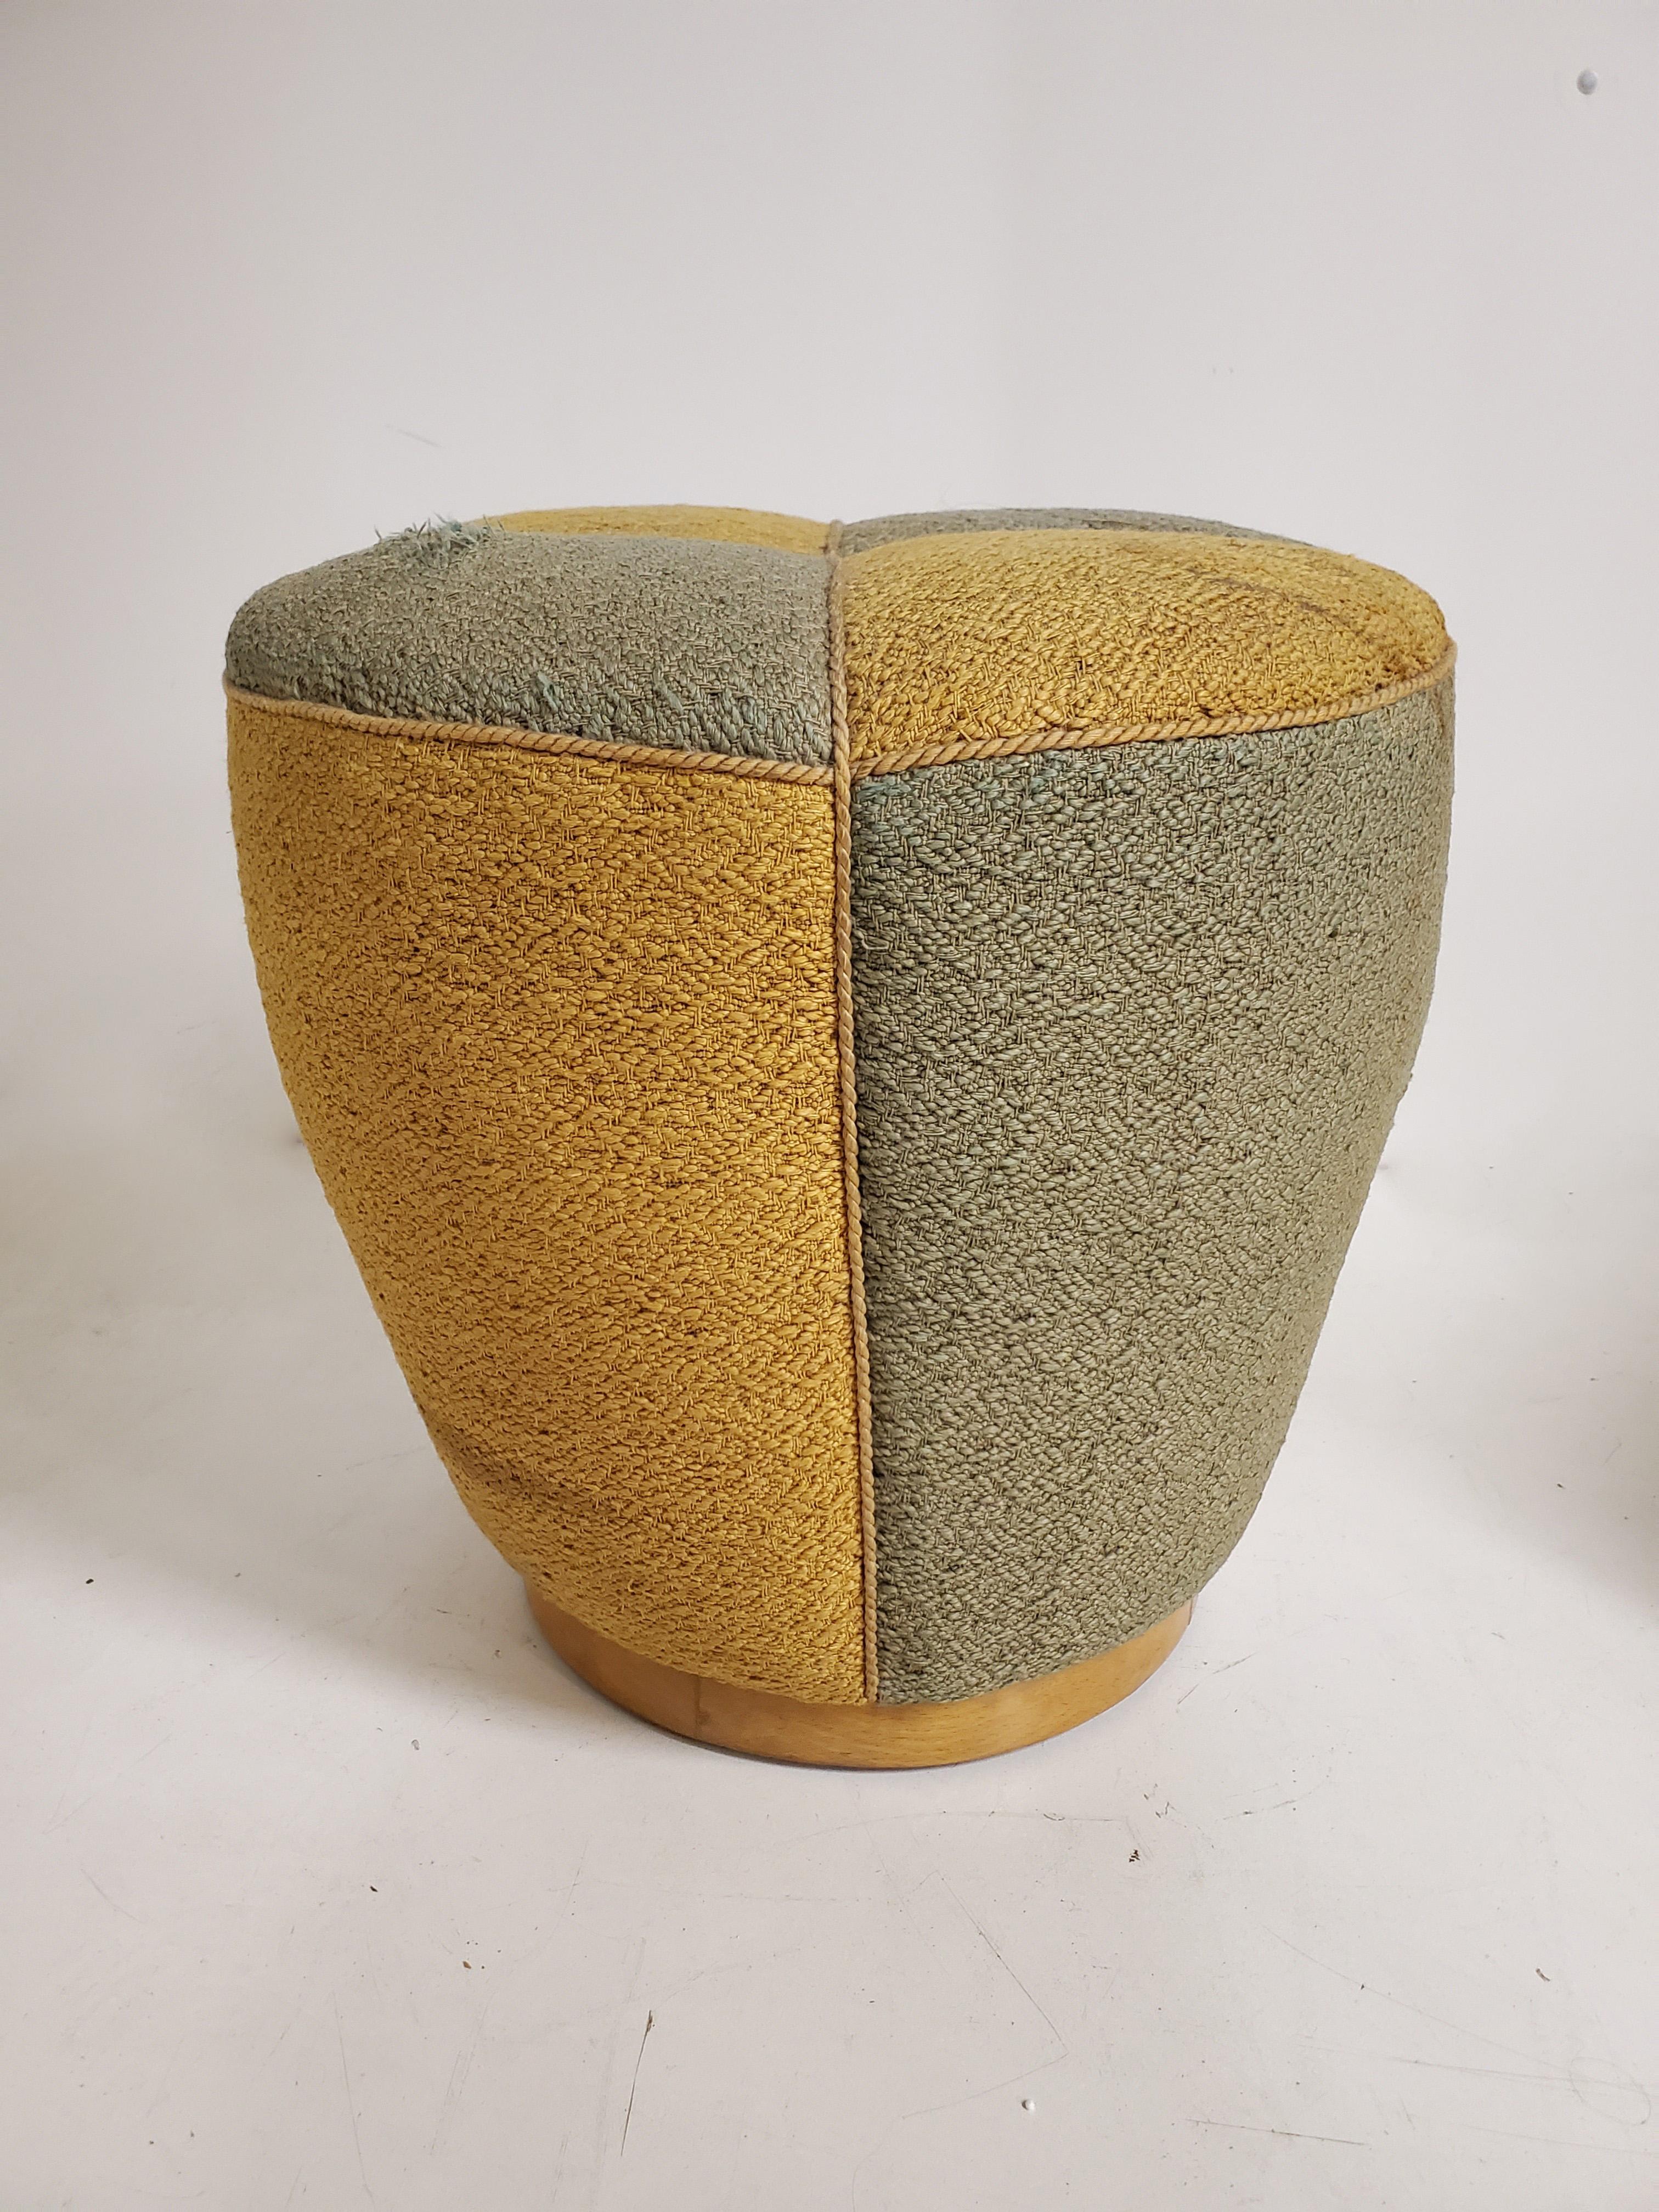 An original  Art Deco upholstered pouf or stool by Jindrich Halabala for UP Závody,
A lovely blond wood base supports the conical shape cushion which is divided into different colored sections like a harlequin's garb. 
The curved wood base has